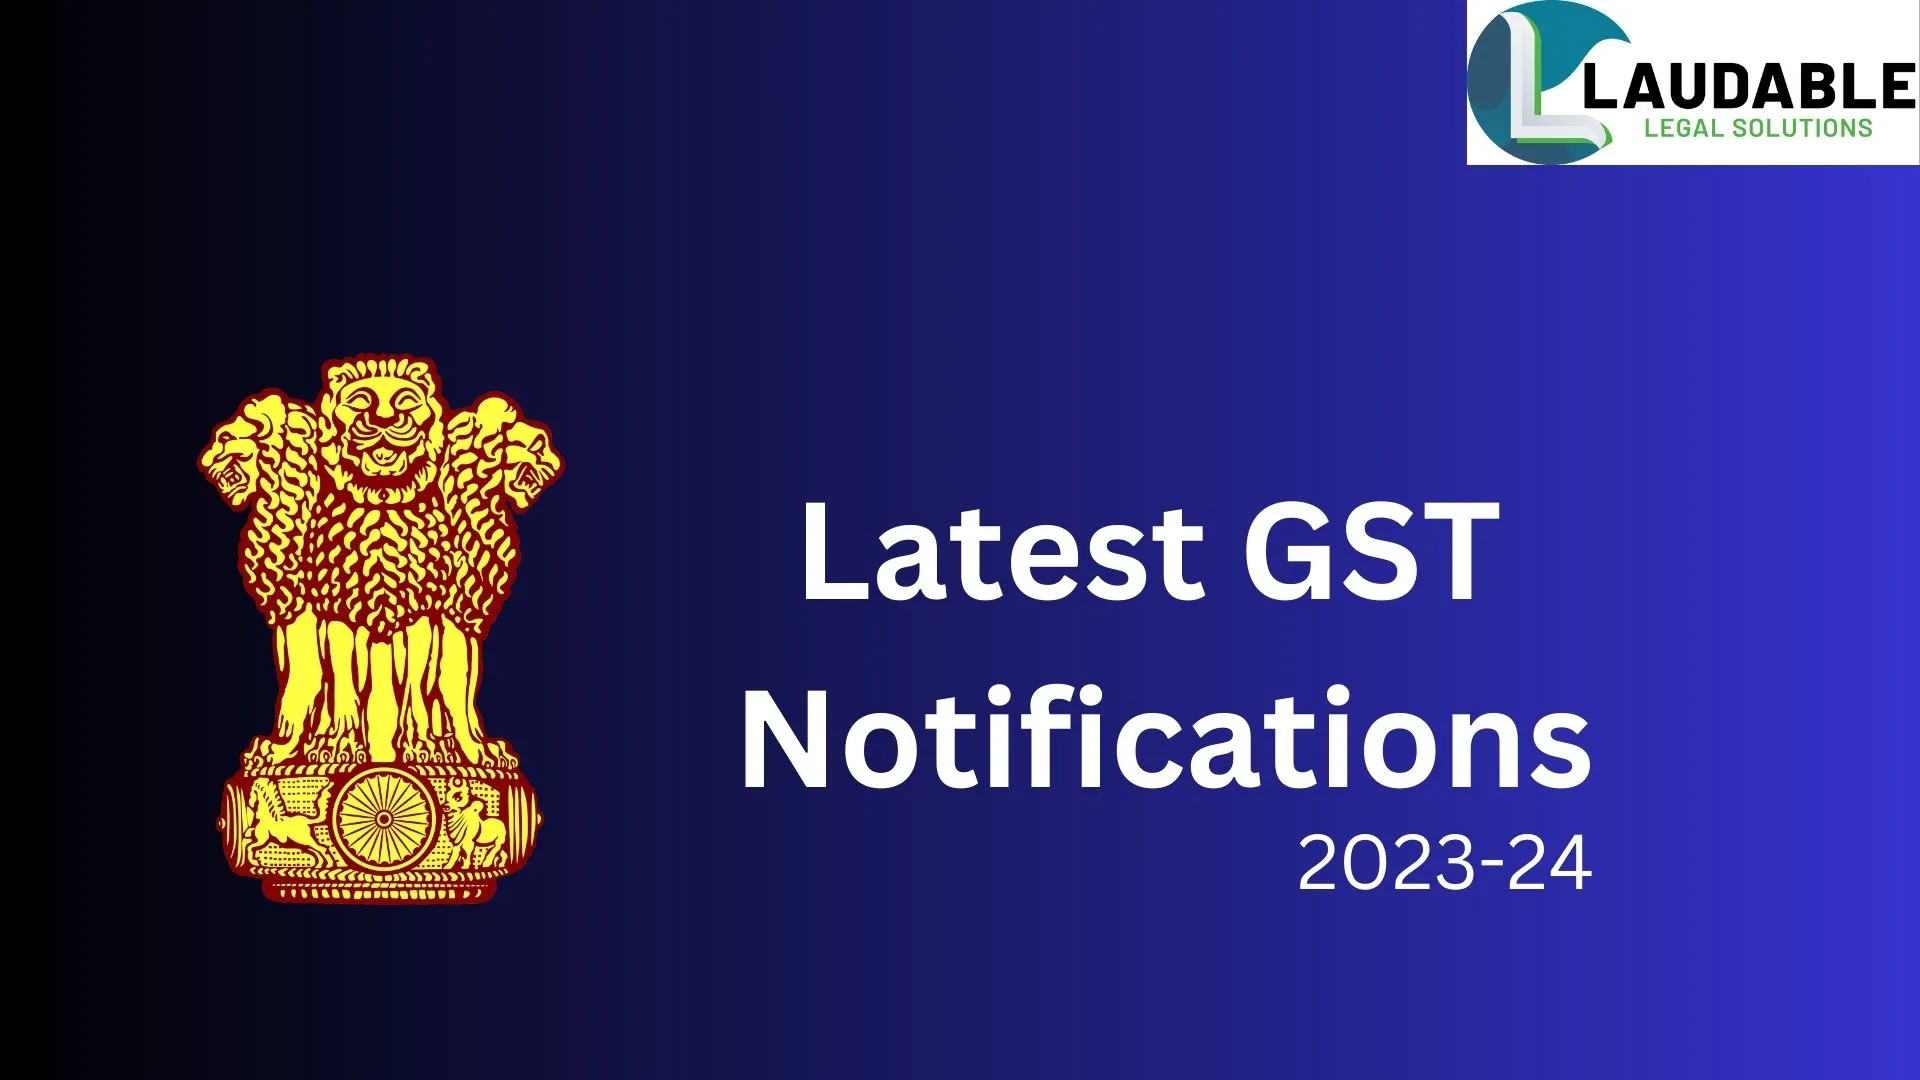 GST Notification No: 07/2023-Central Tax Dated: 31st March, 2023- Late Fees Reduction for Annual GST Return